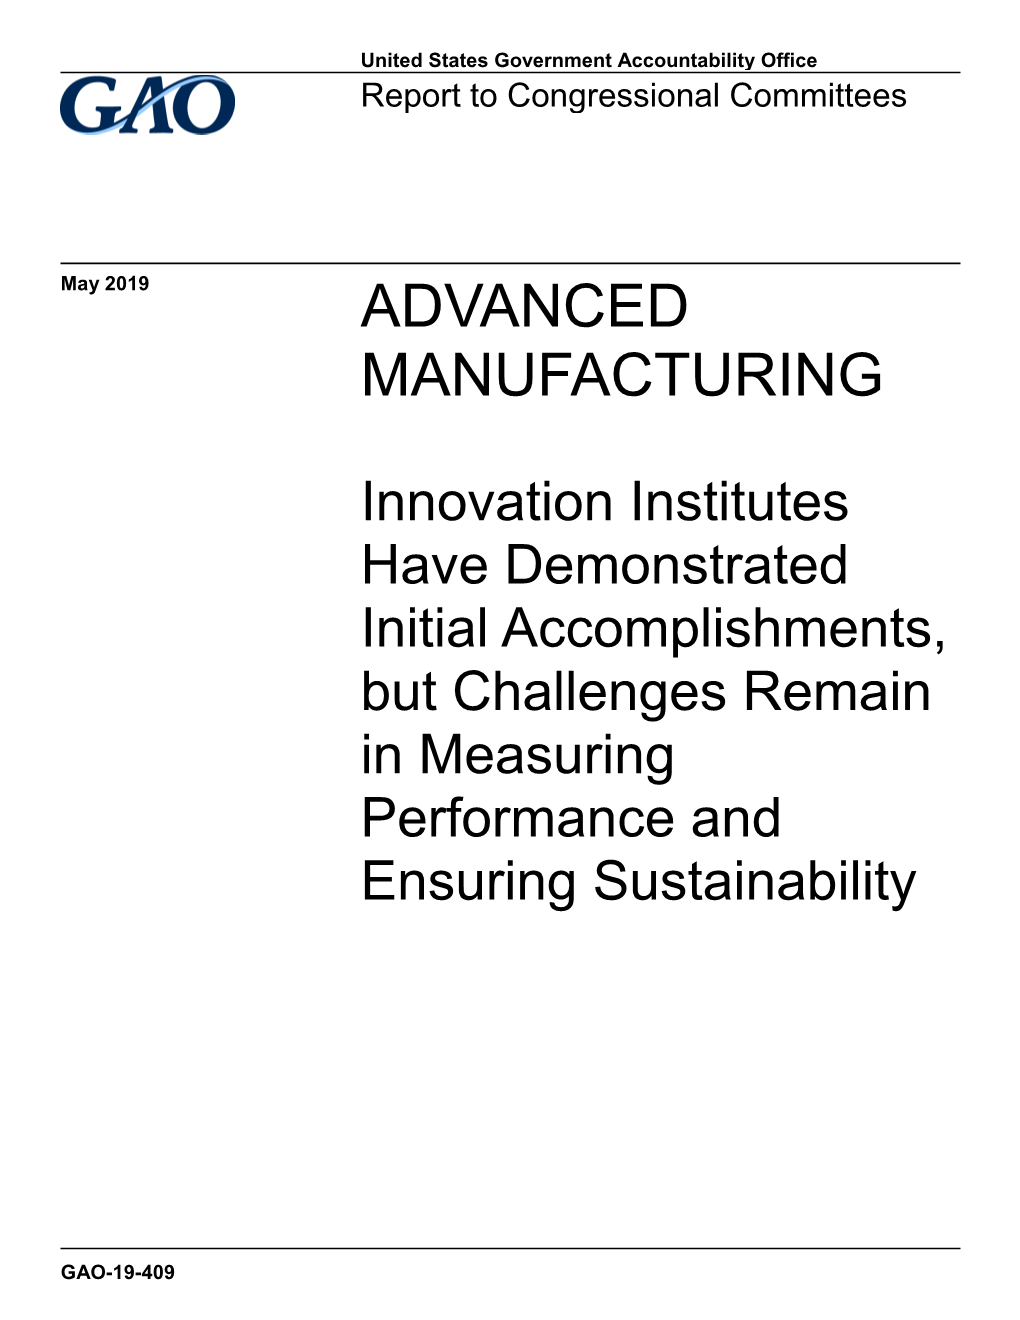 Advanced Manufacturing: Innovation Institutes Have Demonstrated Initial